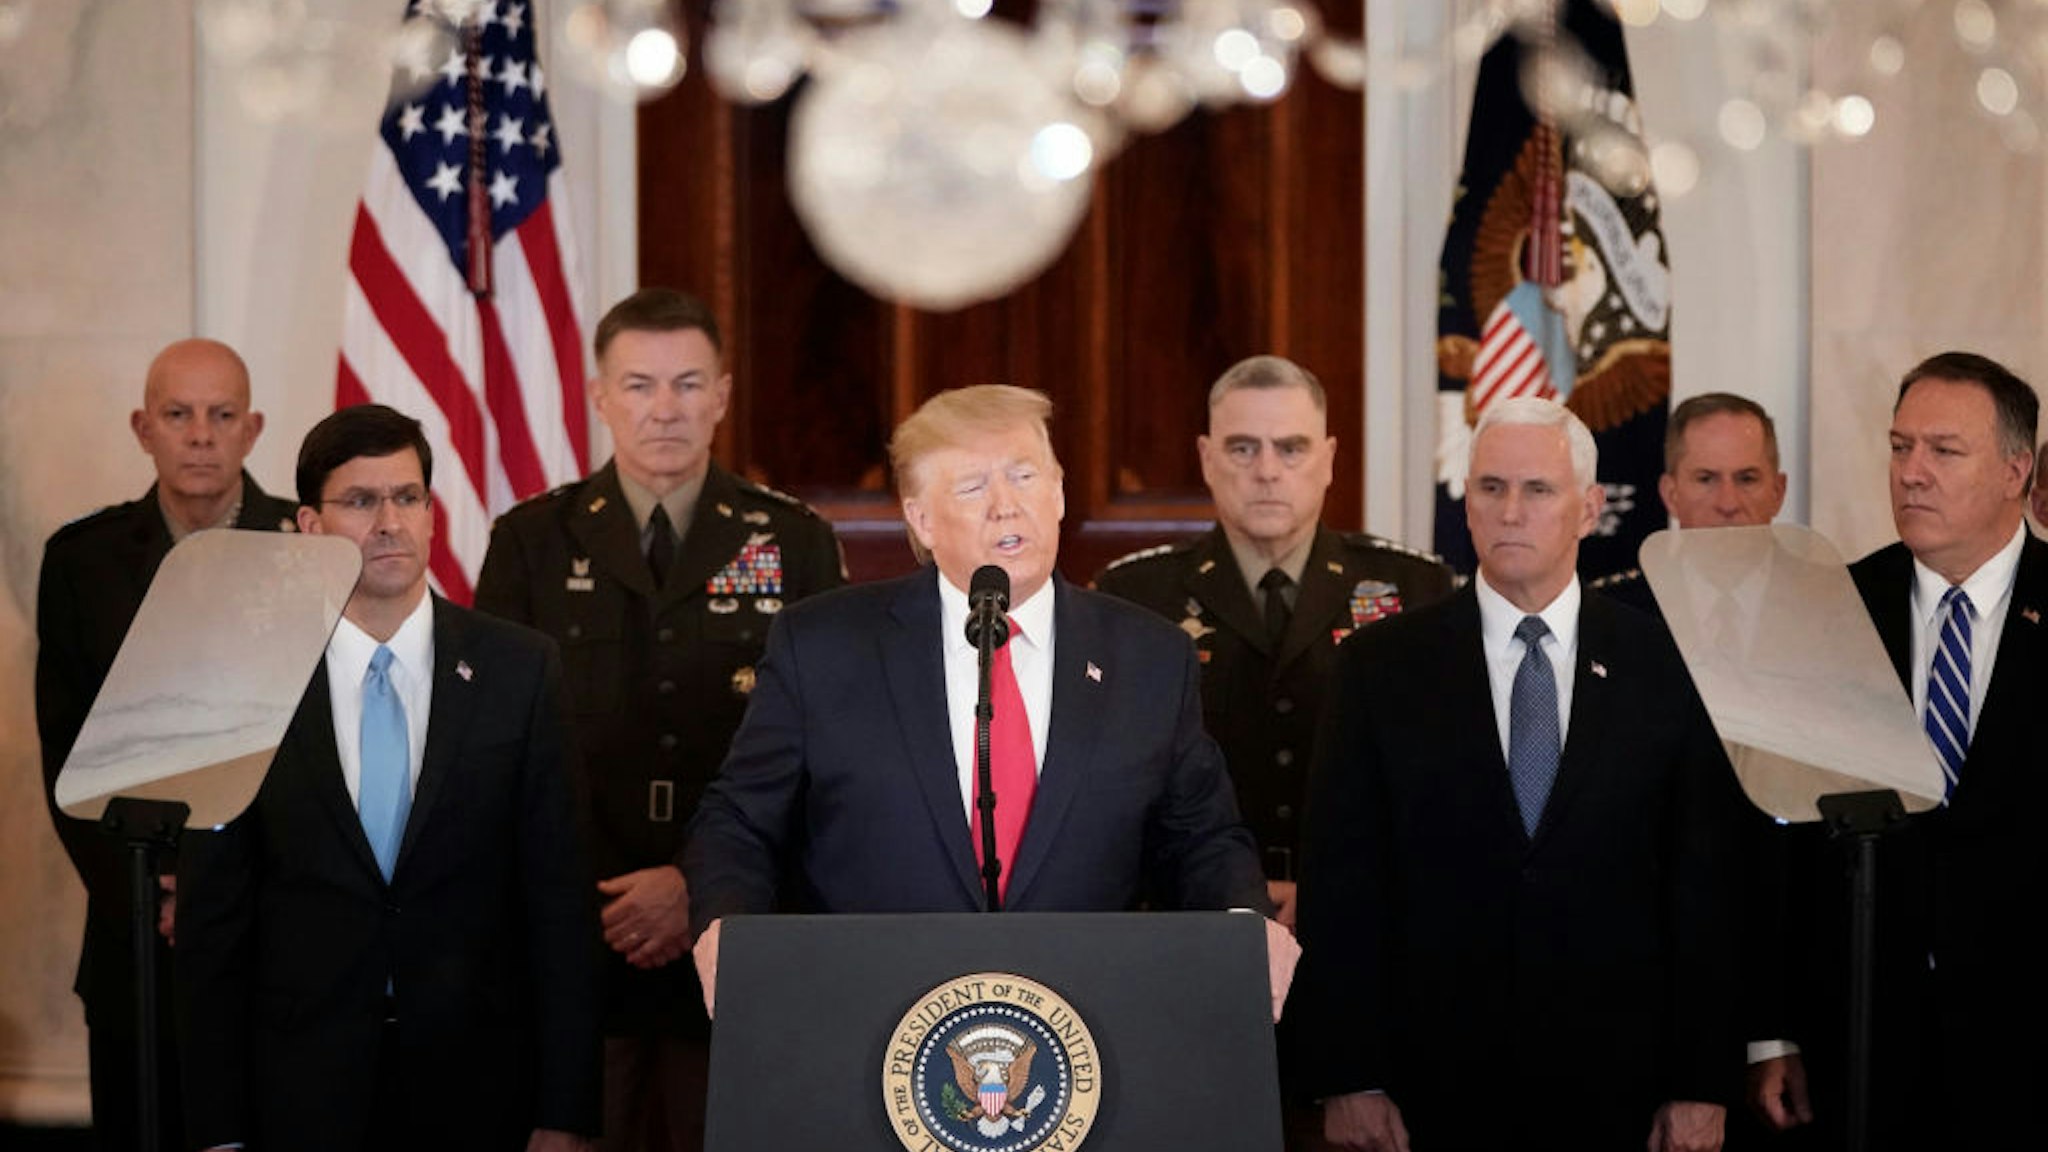 U.S. President Donald Trump speaks from the White House on January 08, 2020 in Washington, DC. During his remarks, Trump addressed the Iranian missile attacks that took place last night in Iraq and said, “As long as I am president of the United States, Iran will never be allowed to have a nuclear weapon.”